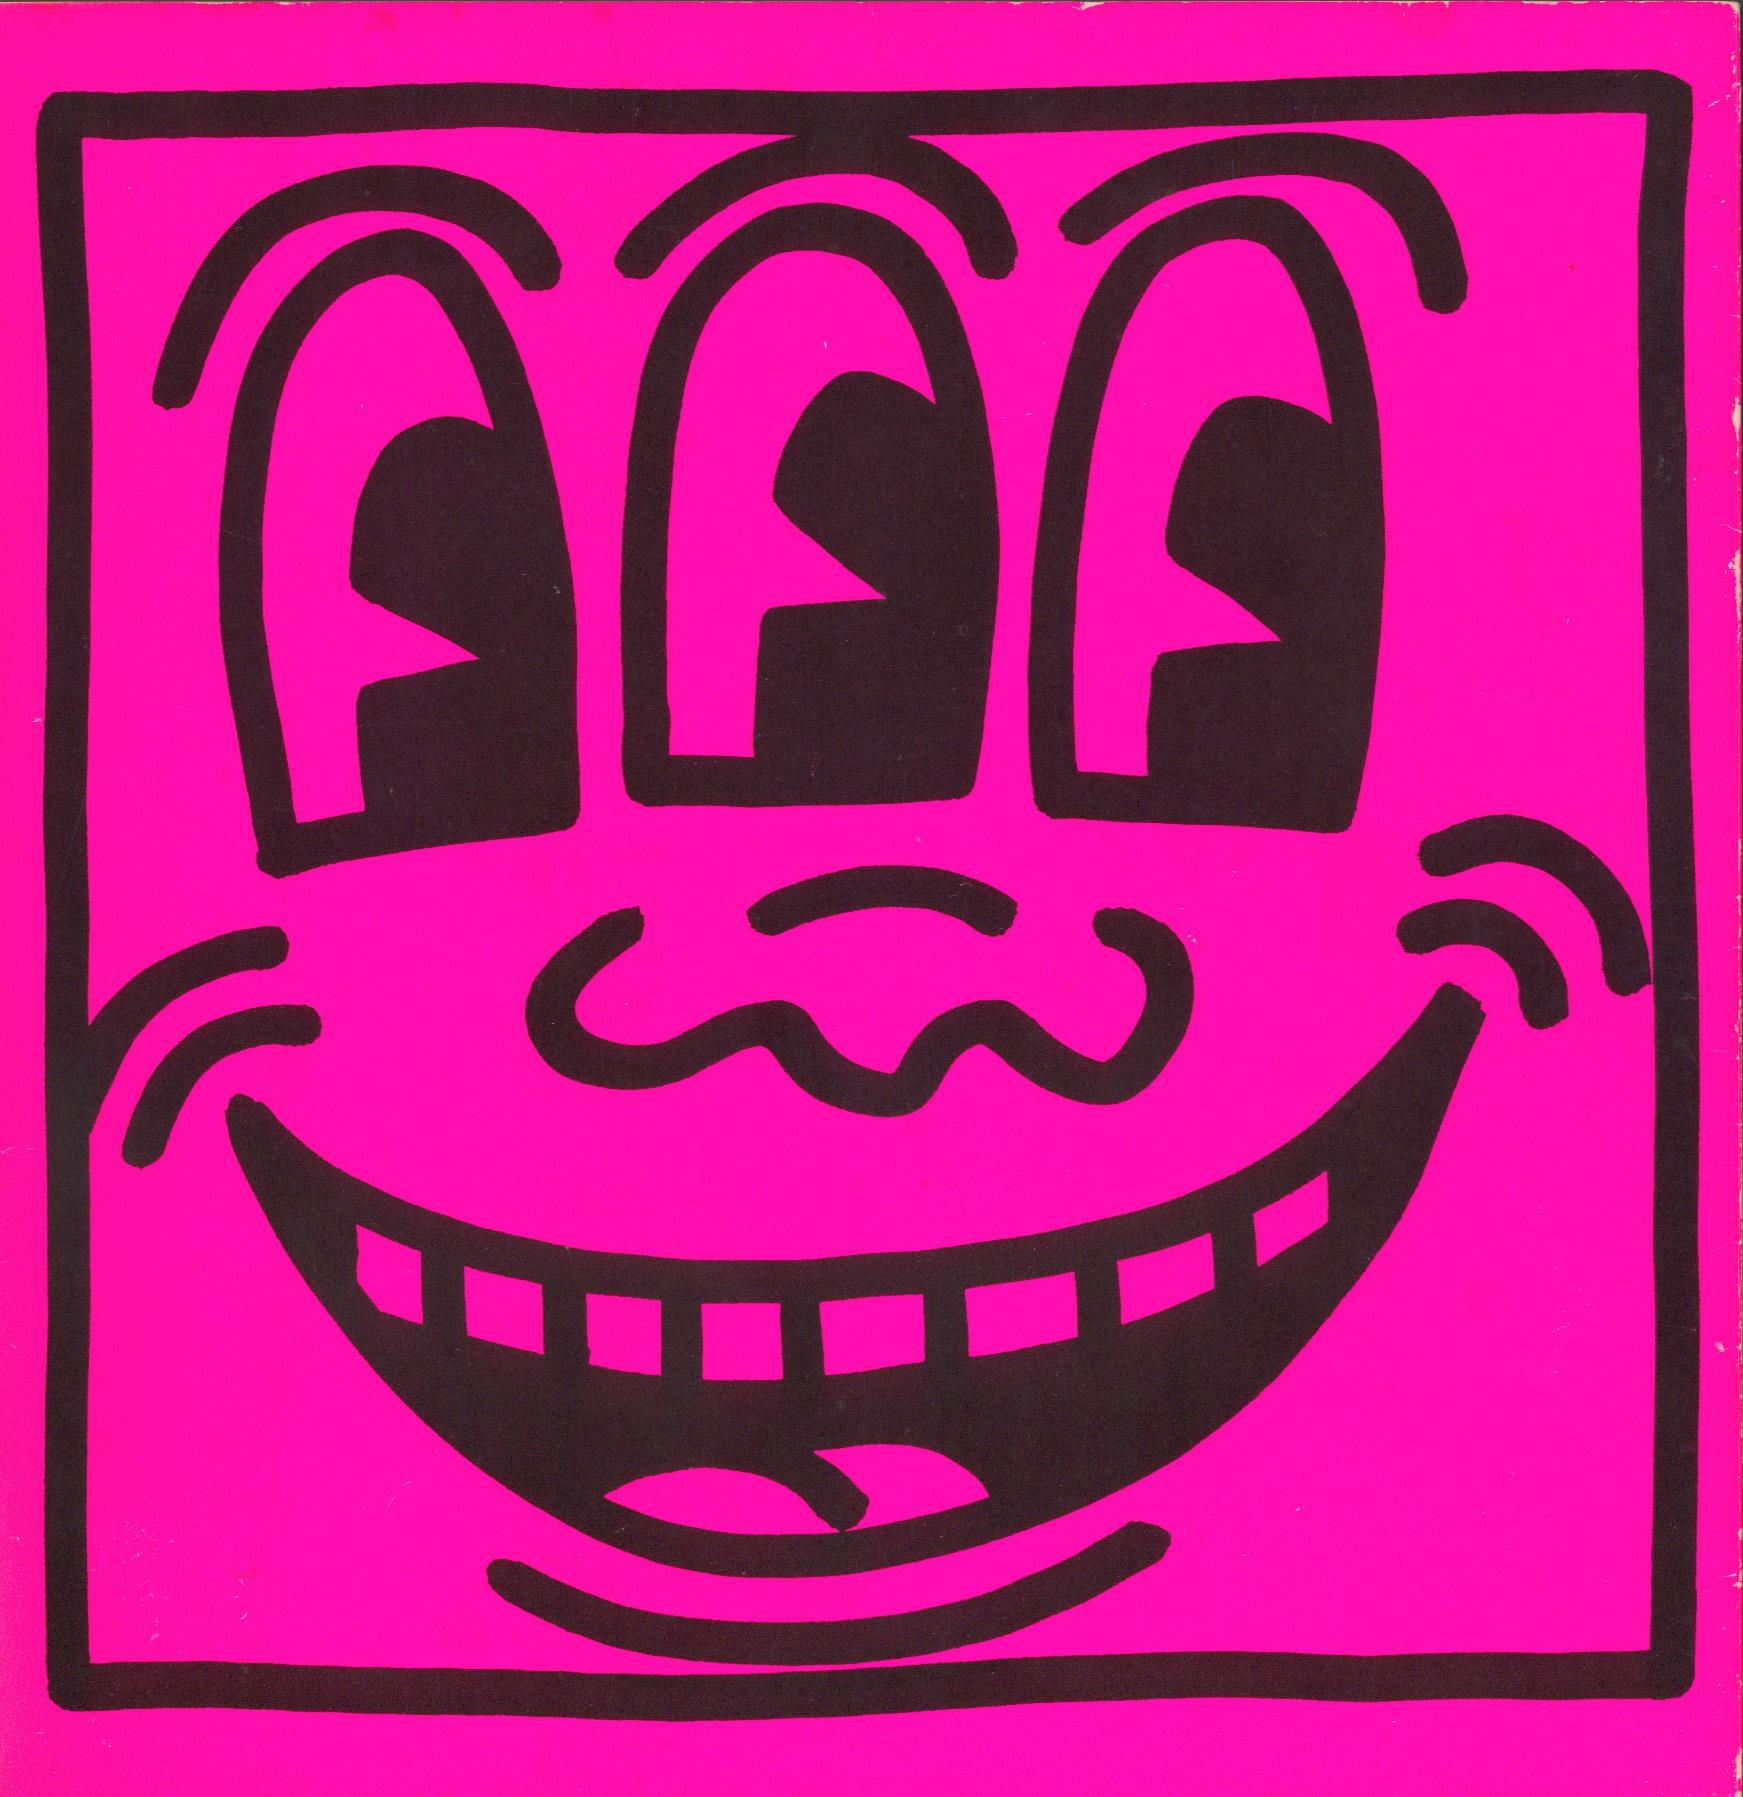 Keith Haring Three Eyed face 1982 (lithographic cover) - Print by (after) Keith Haring